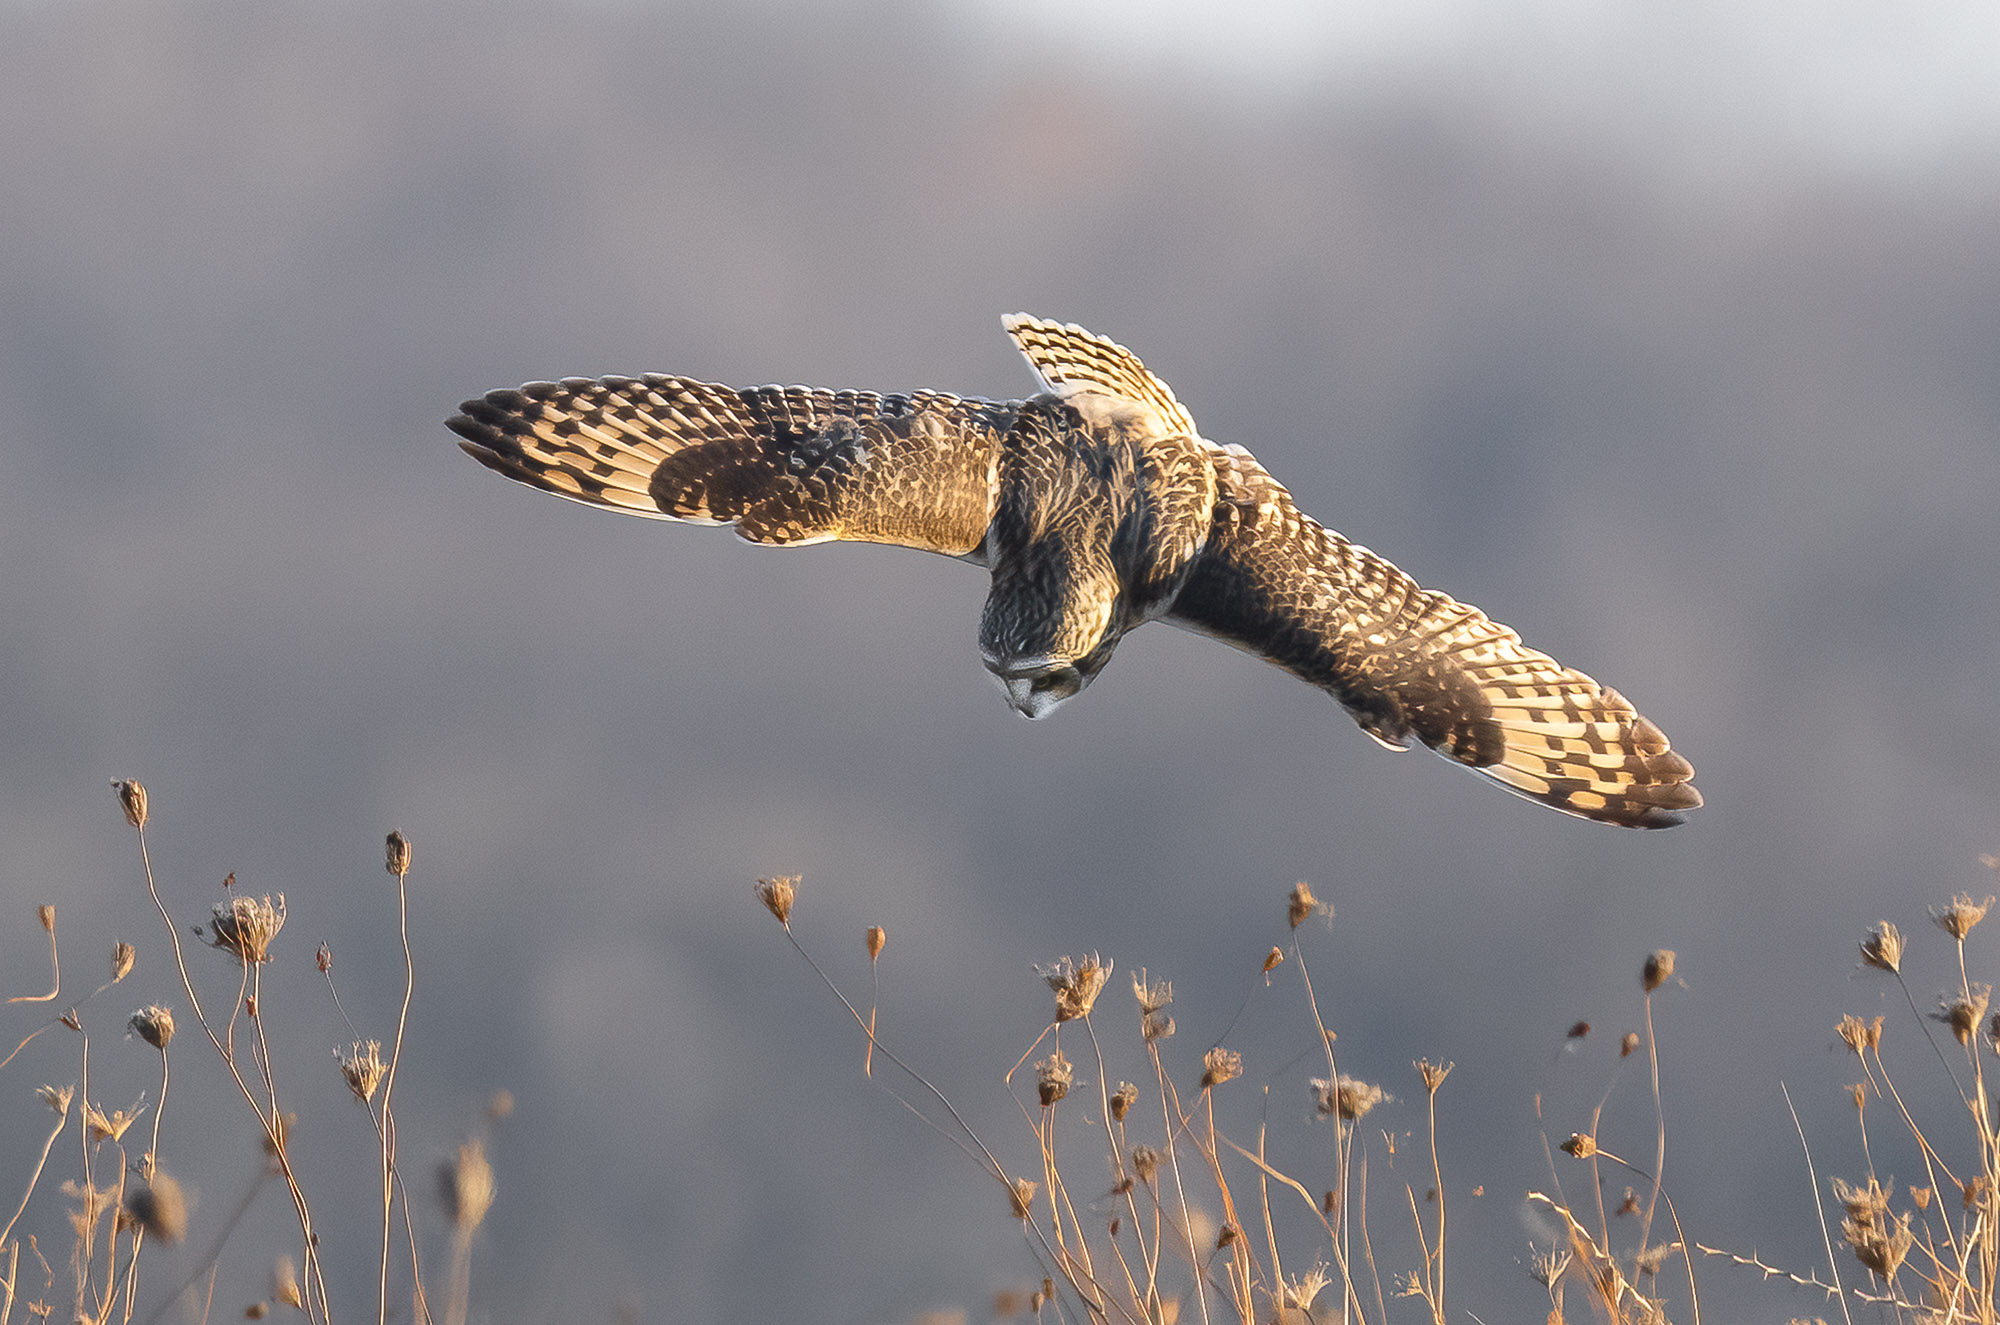 Short-eared Owl dive bombs for a vole